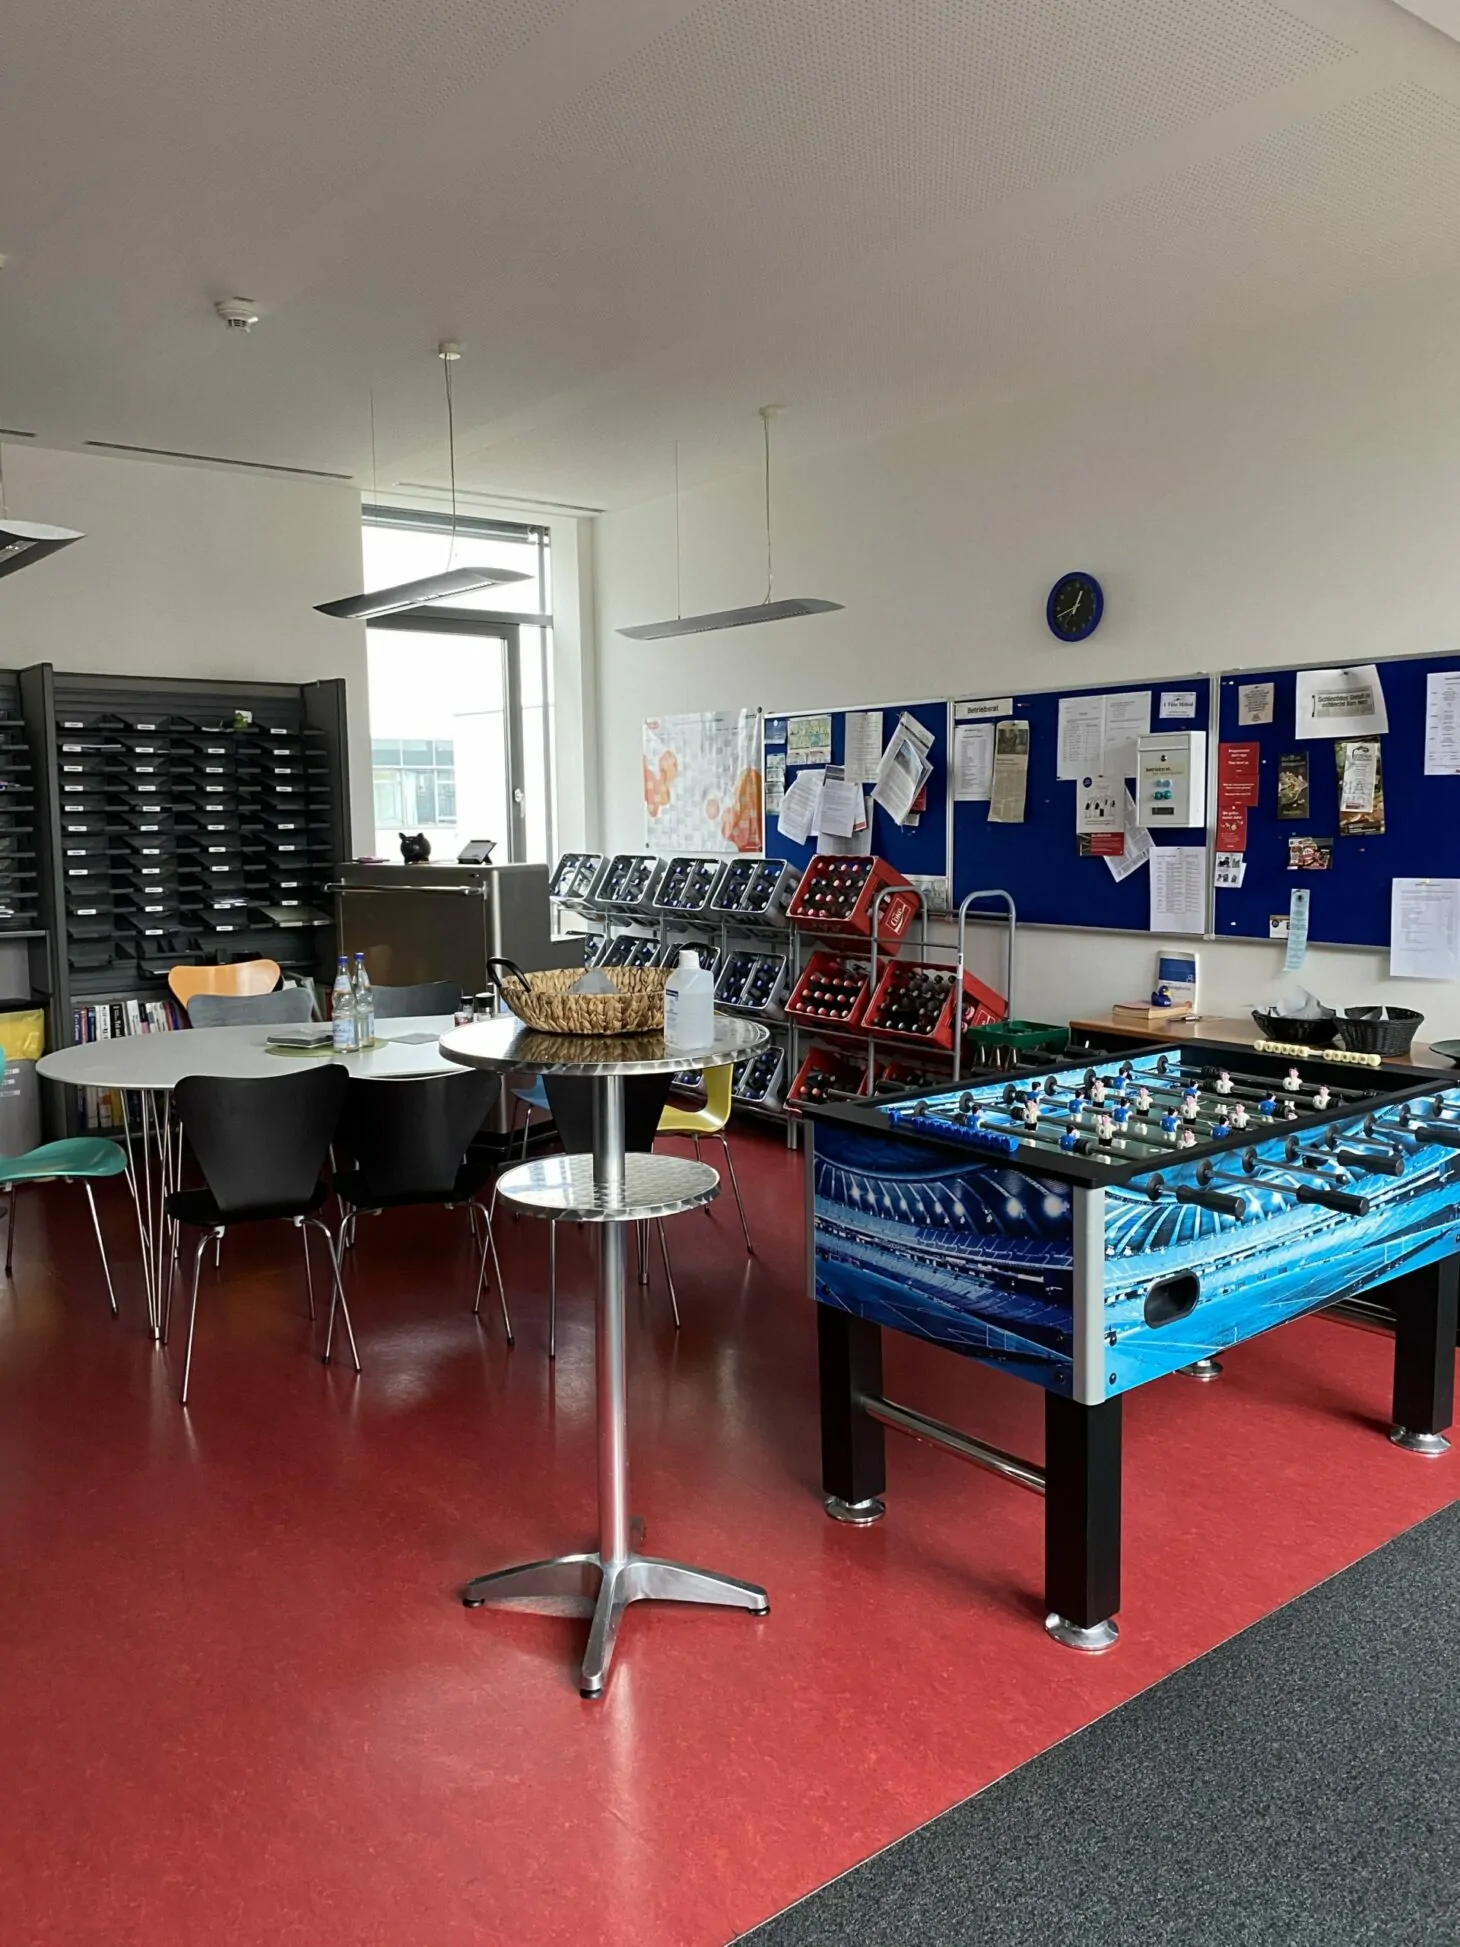 Picture of a kitchen with table football, valantic branch Frankfurt am Main